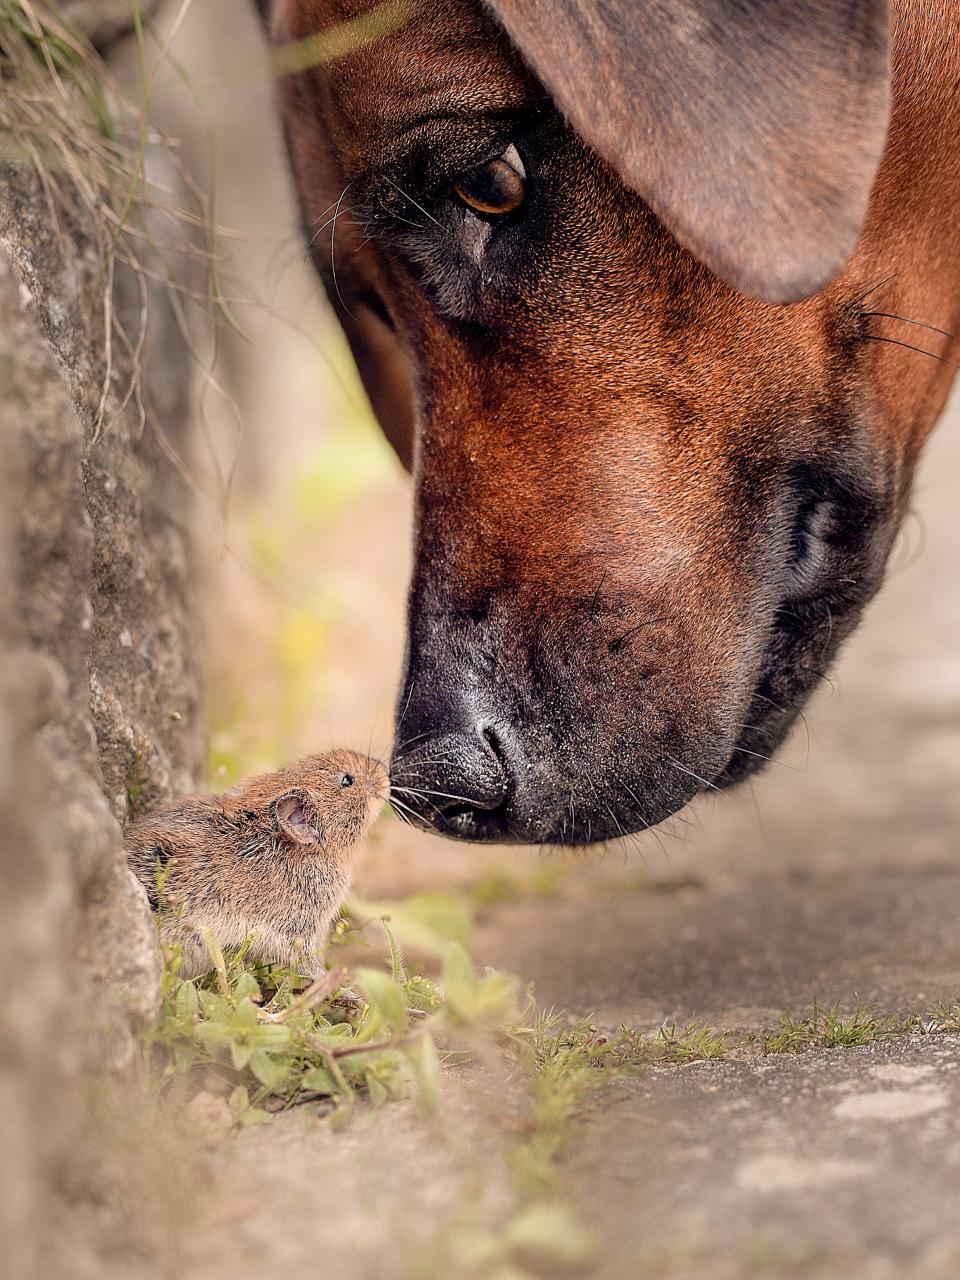 A dog touches its nose to a mouse